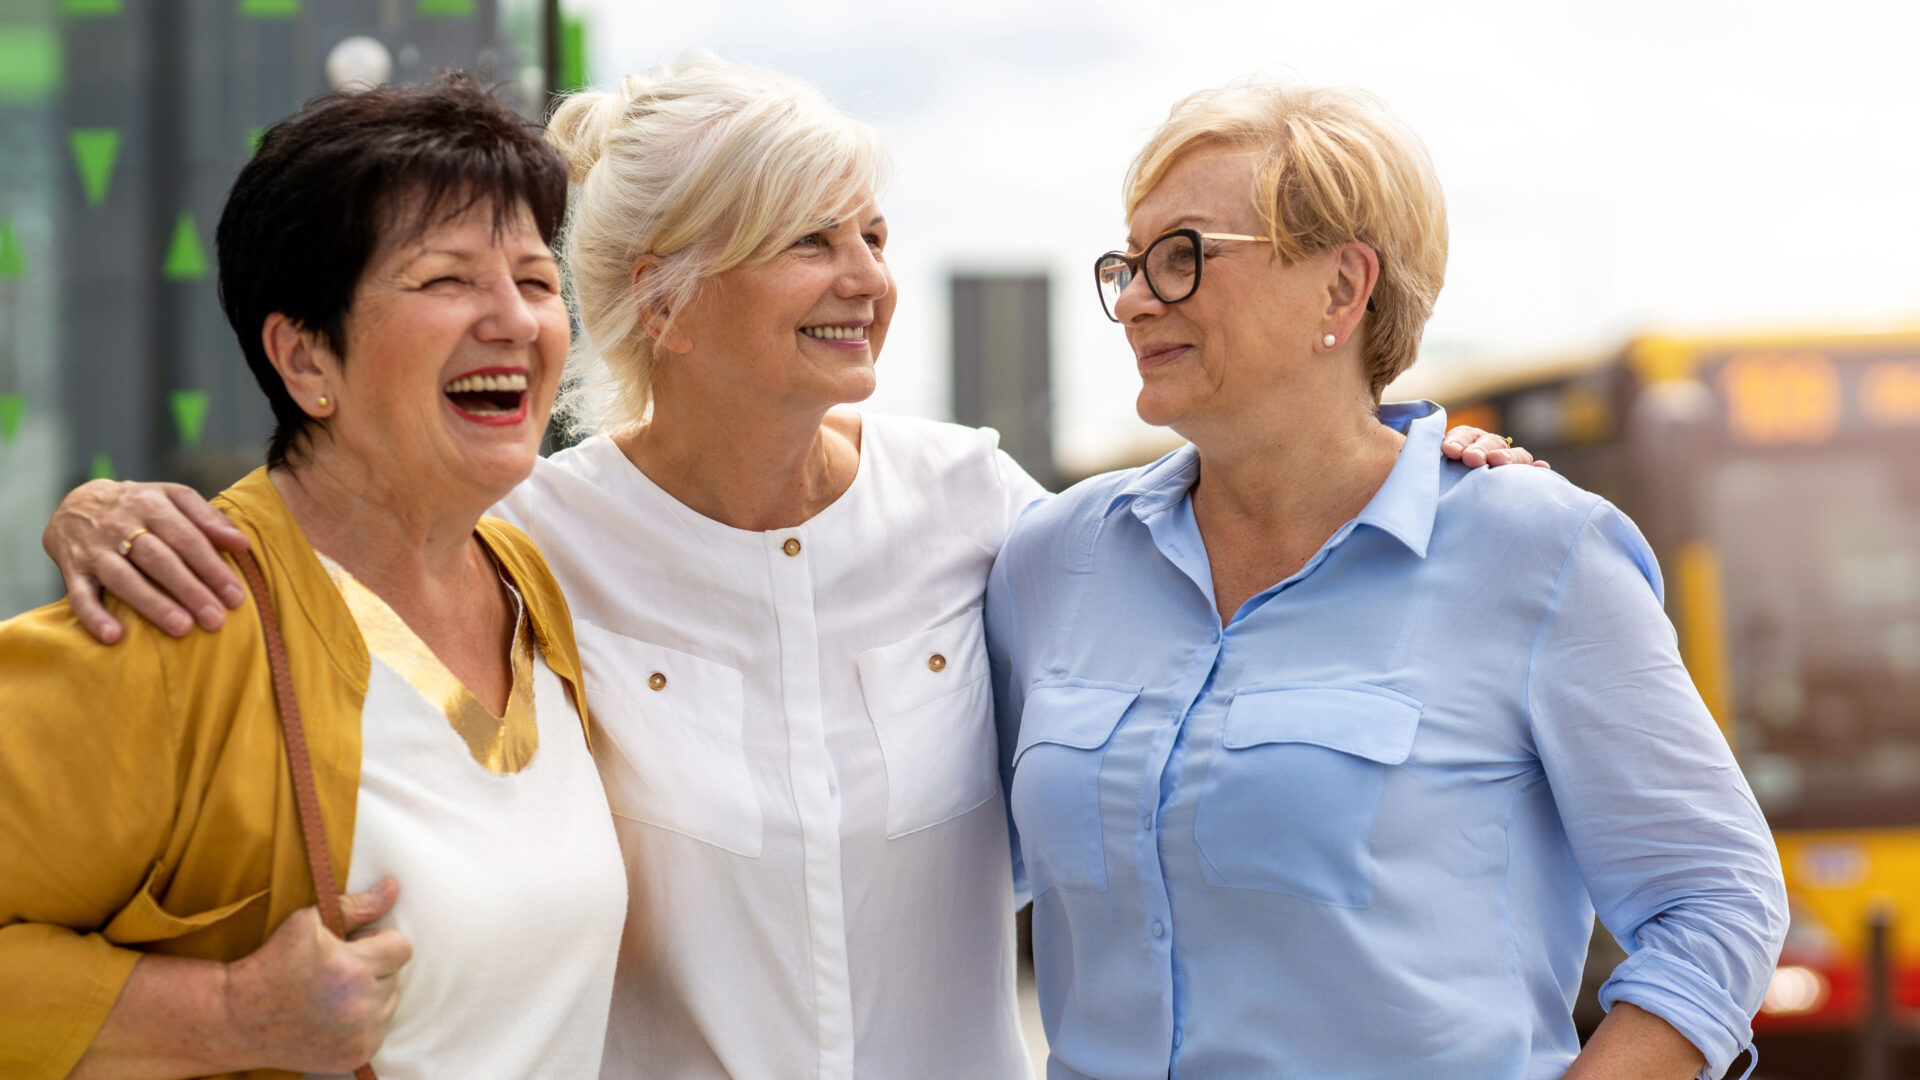 Three senior women are smiling and laughing as they have their arms around one another